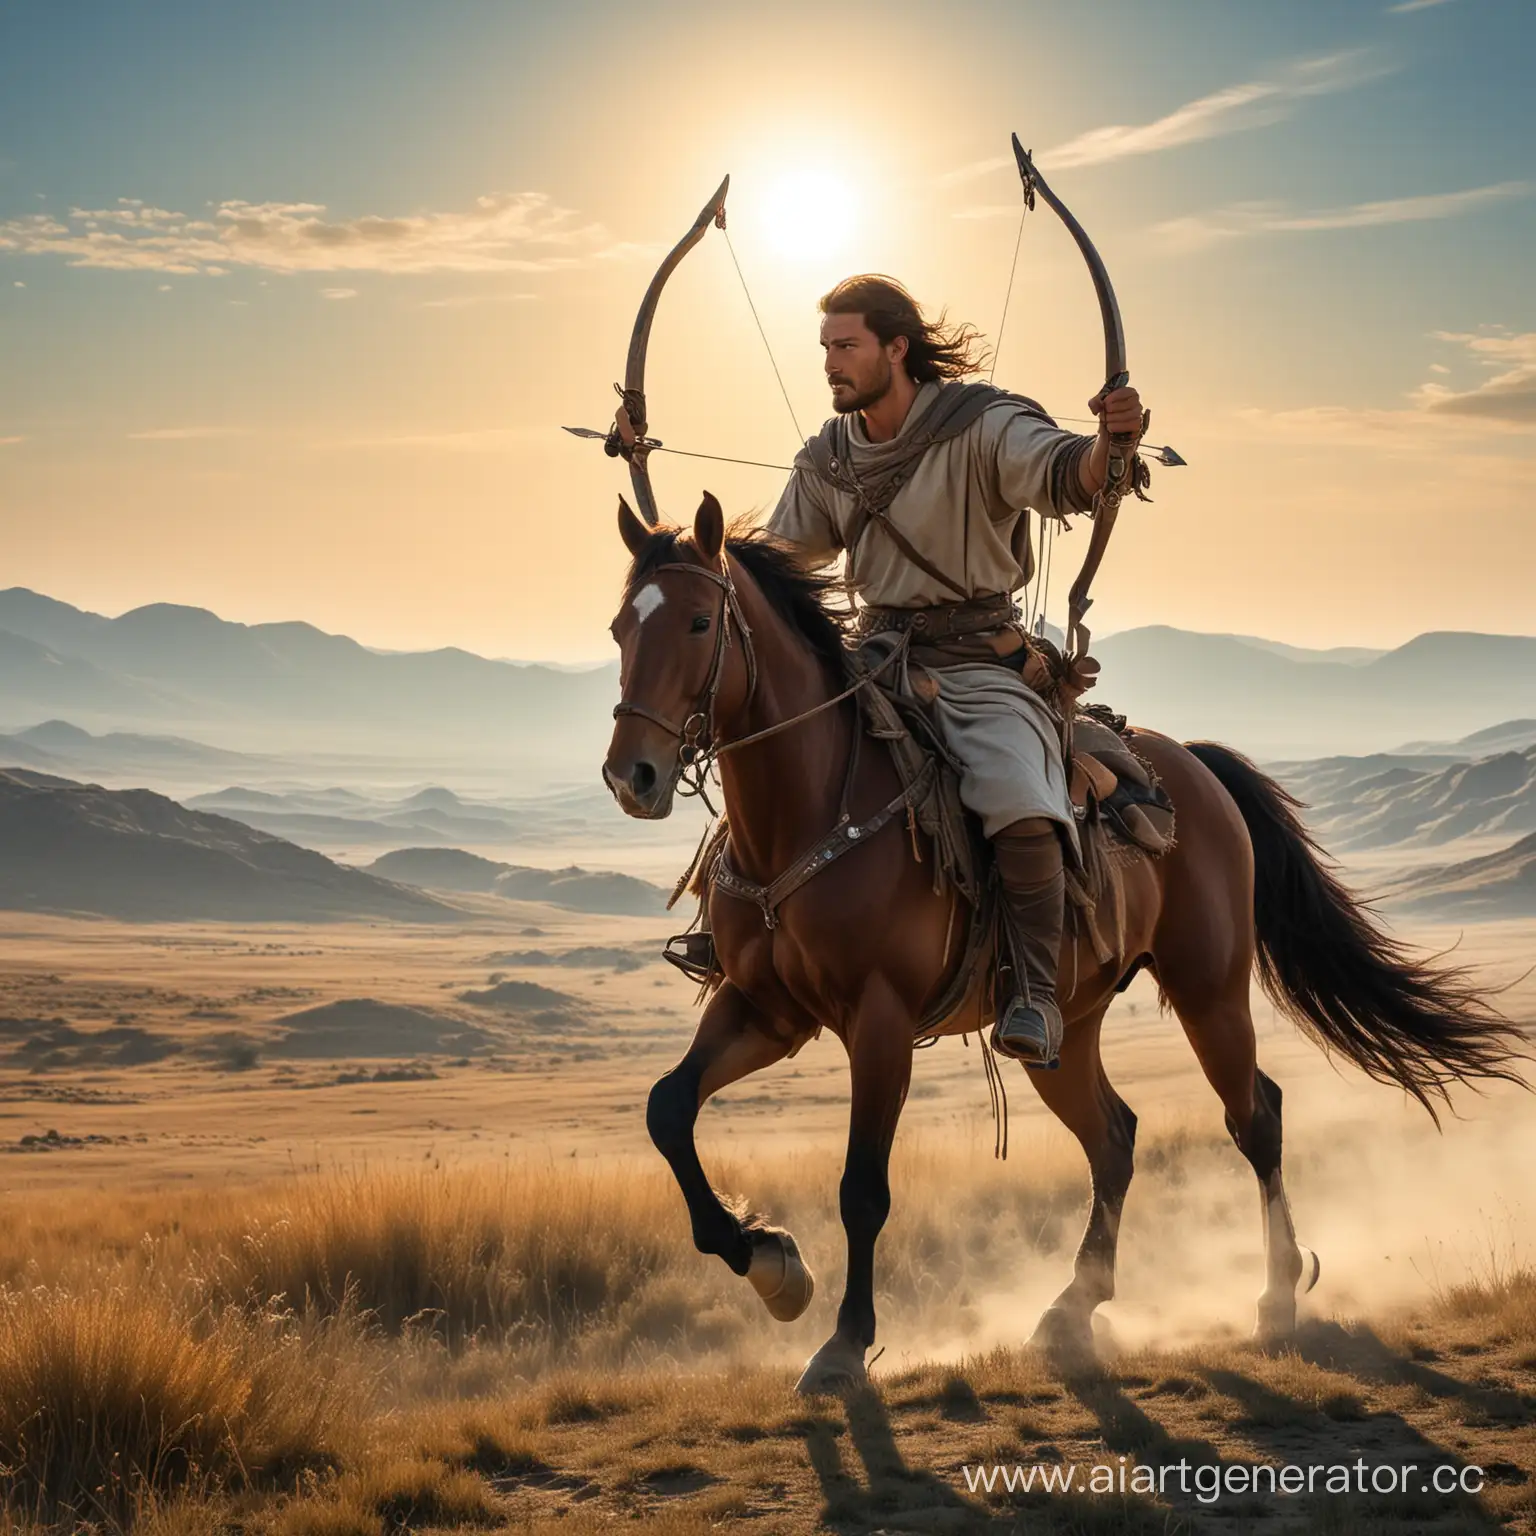 Hunnic-Warrior-Nomads-Riding-Across-Endless-Steppe